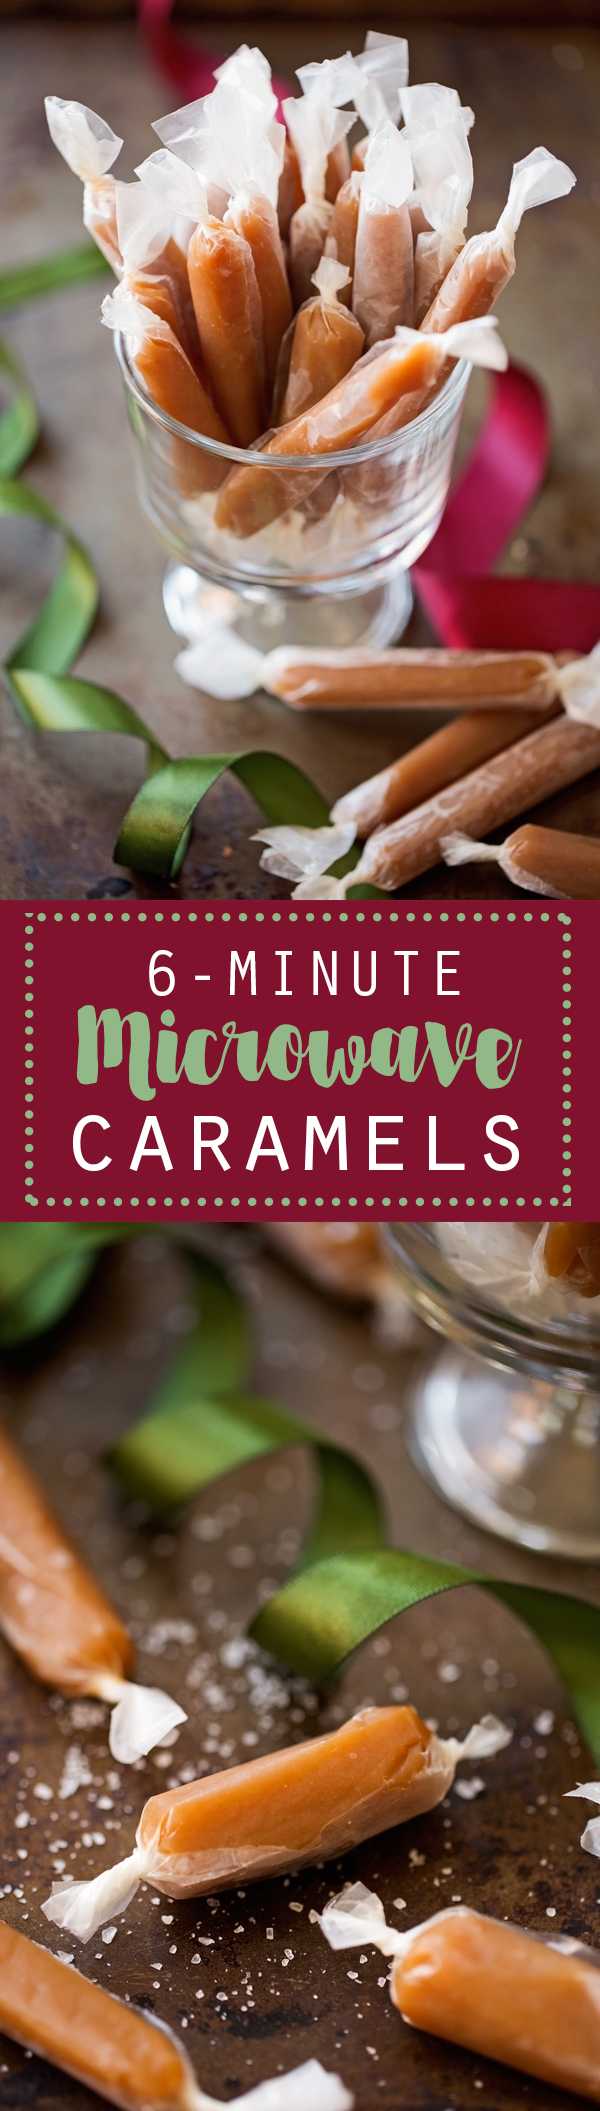 Easy 6-Minute Microwave Caramels - These take just 6 minutes in the microwave and 7 simple ingredients! Chewy Caramels just like Werther's! | #microwavecaramel #caramelchews #caramels | Littlespicejar.com